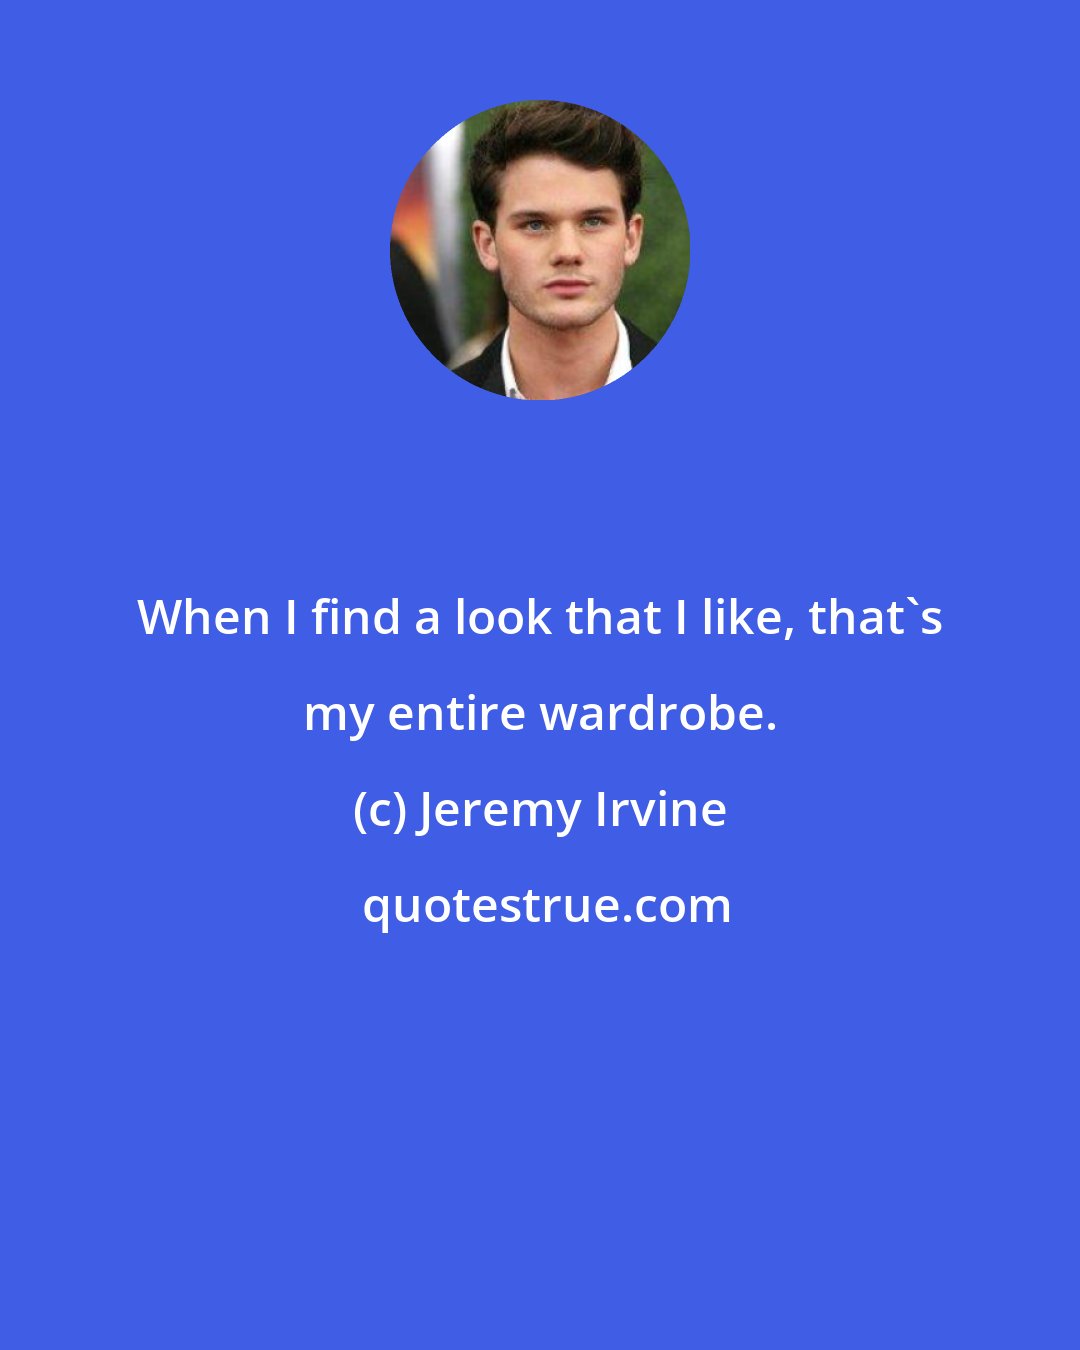 Jeremy Irvine: When I find a look that I like, that's my entire wardrobe.